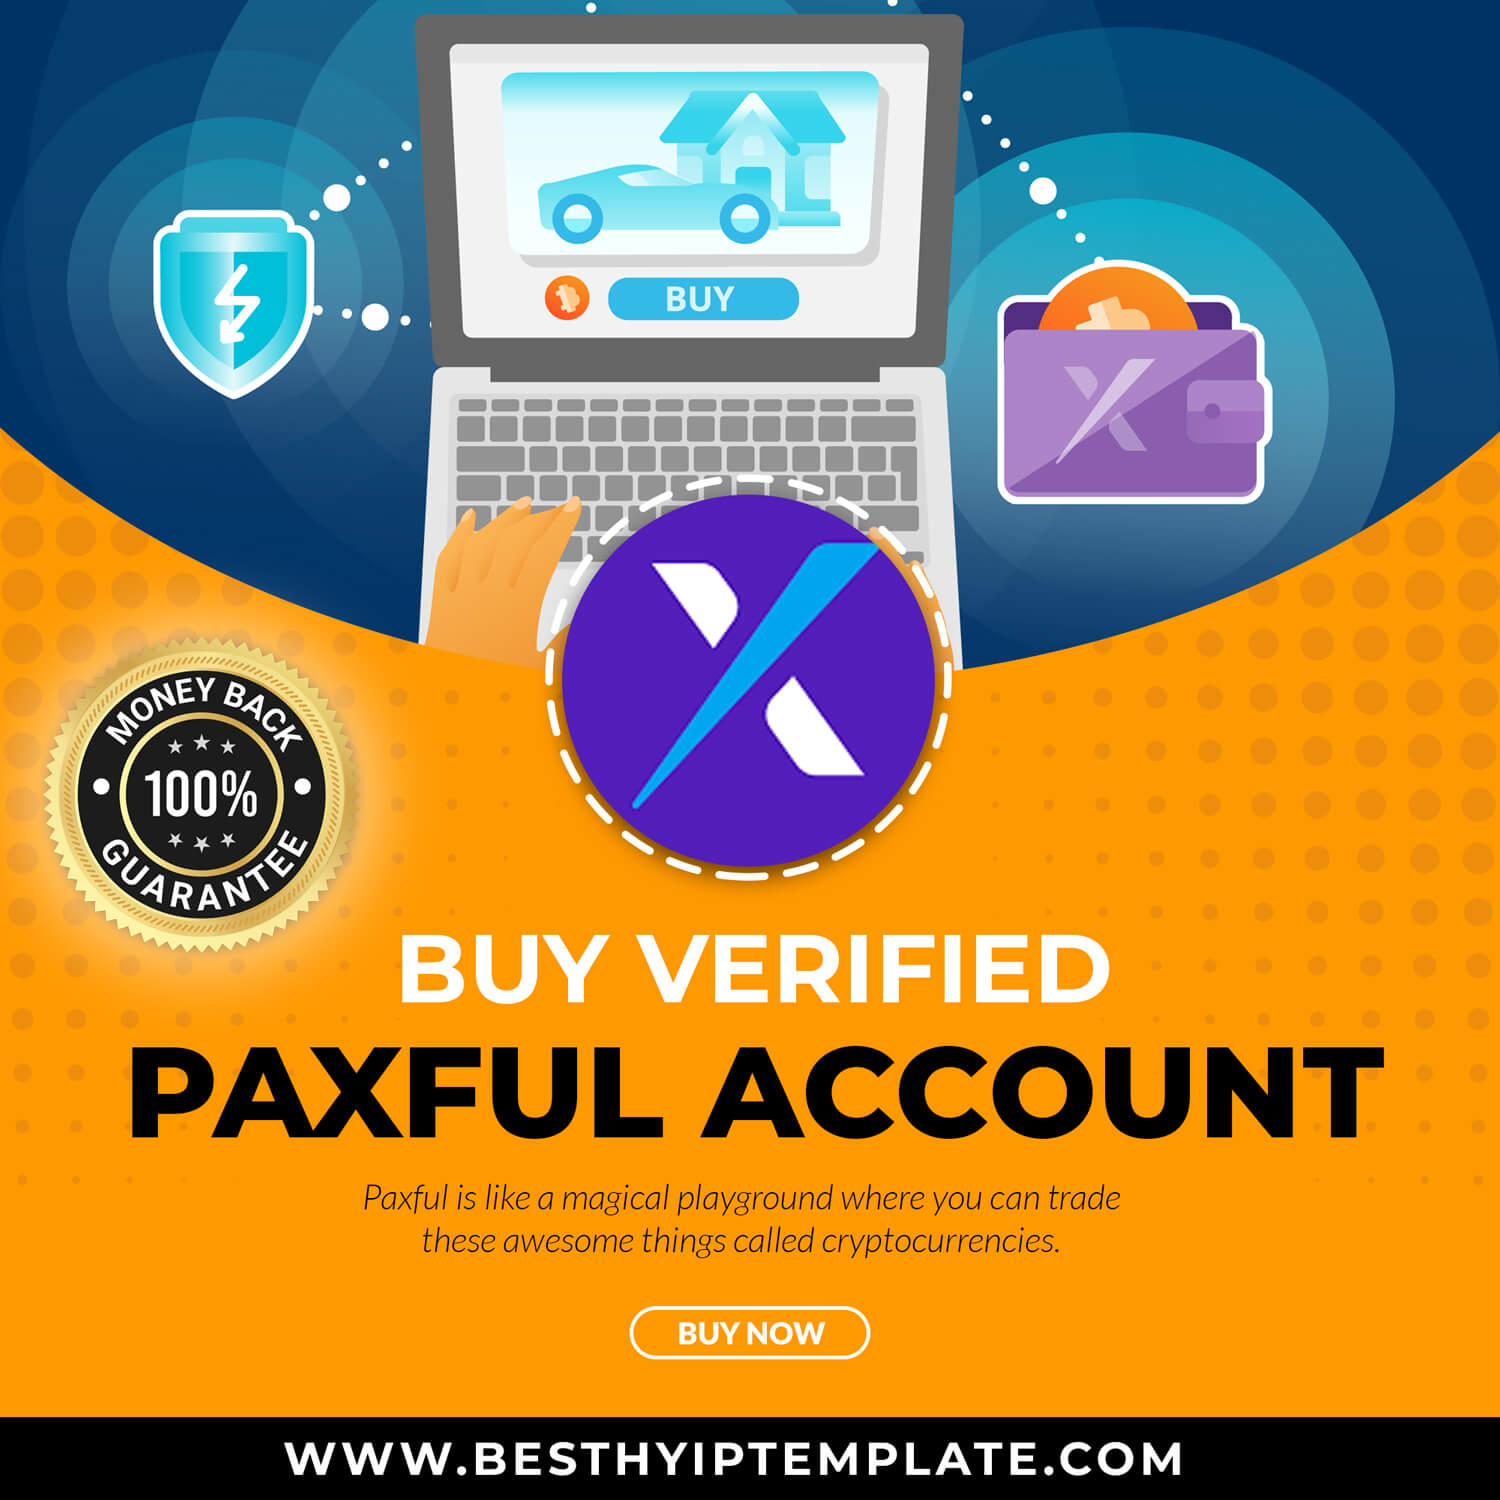 Buy Verified Paxful Accounts | Besthyiptemplate